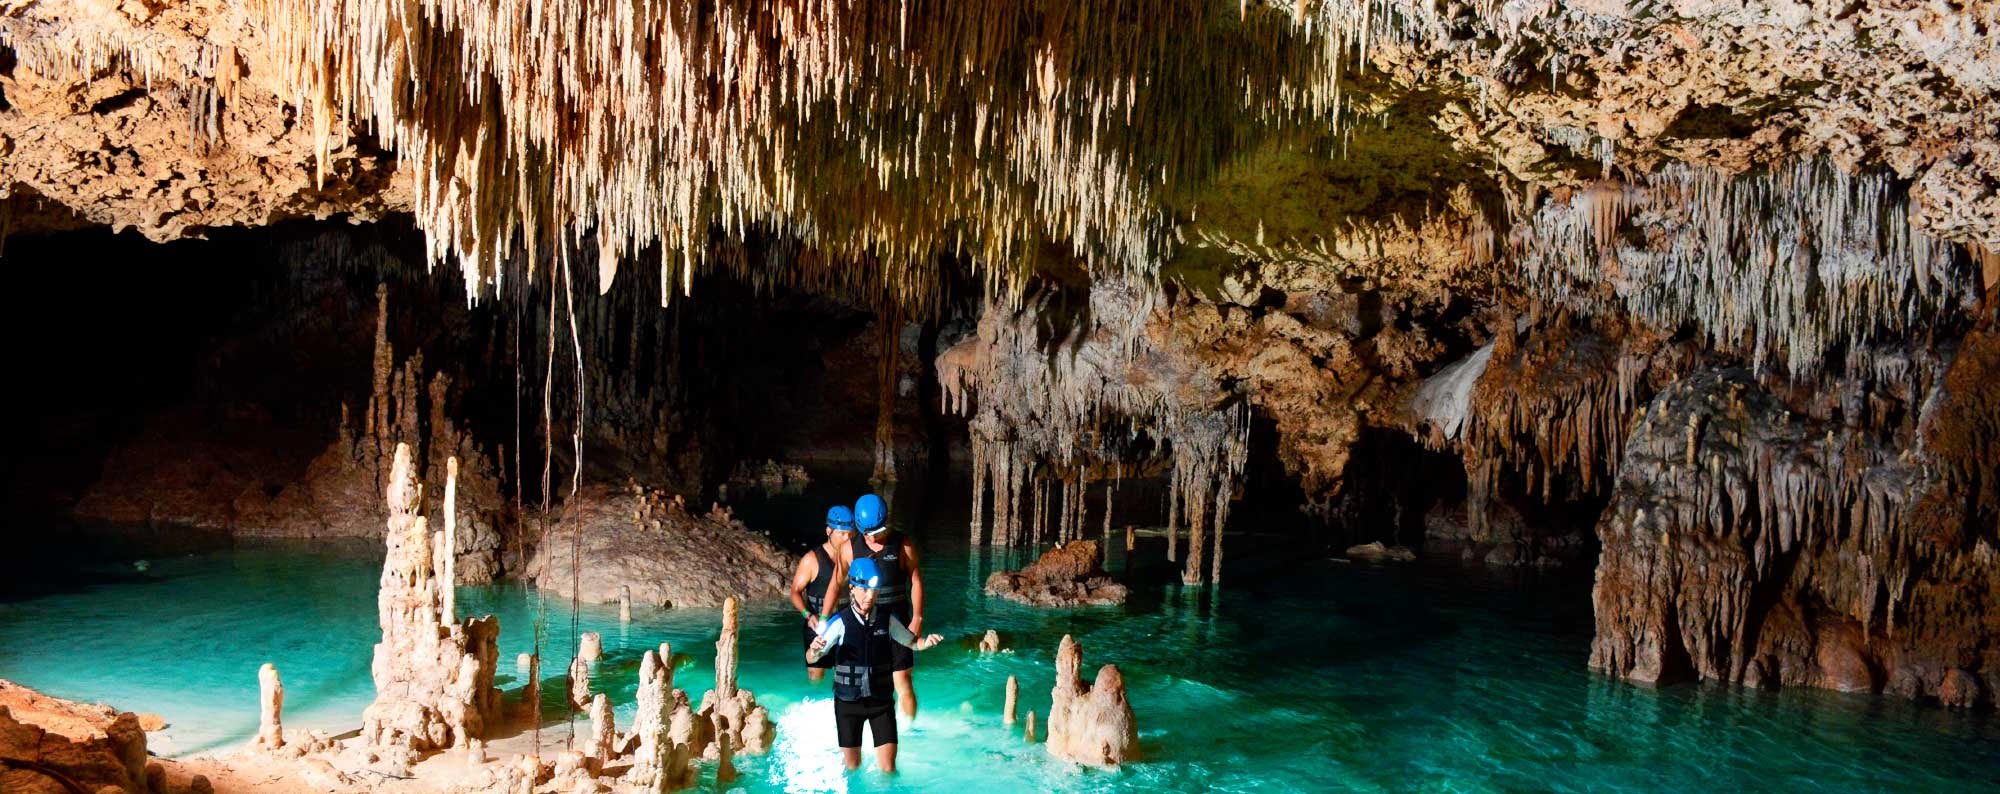 Places to visit in Cancun